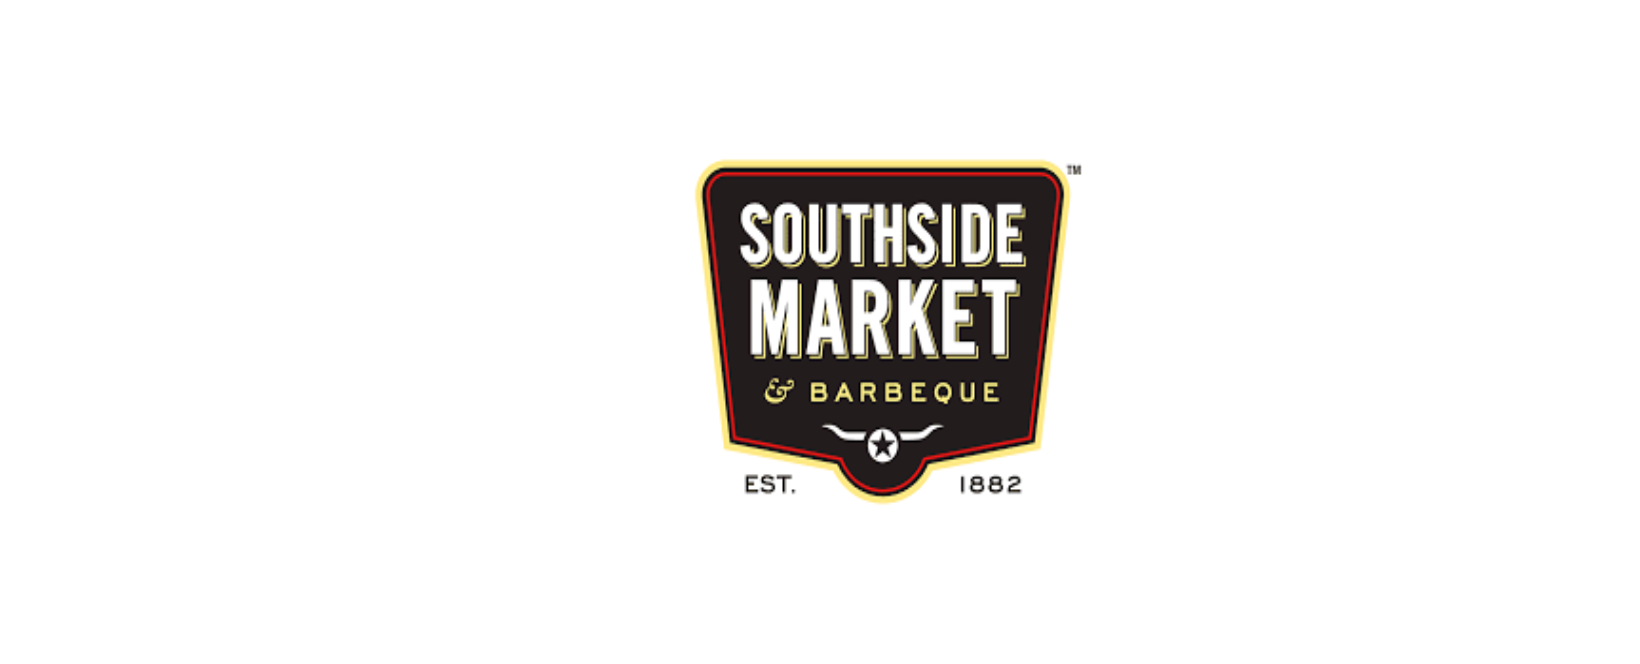 Southside Market & Barbeque Discount Code 2022